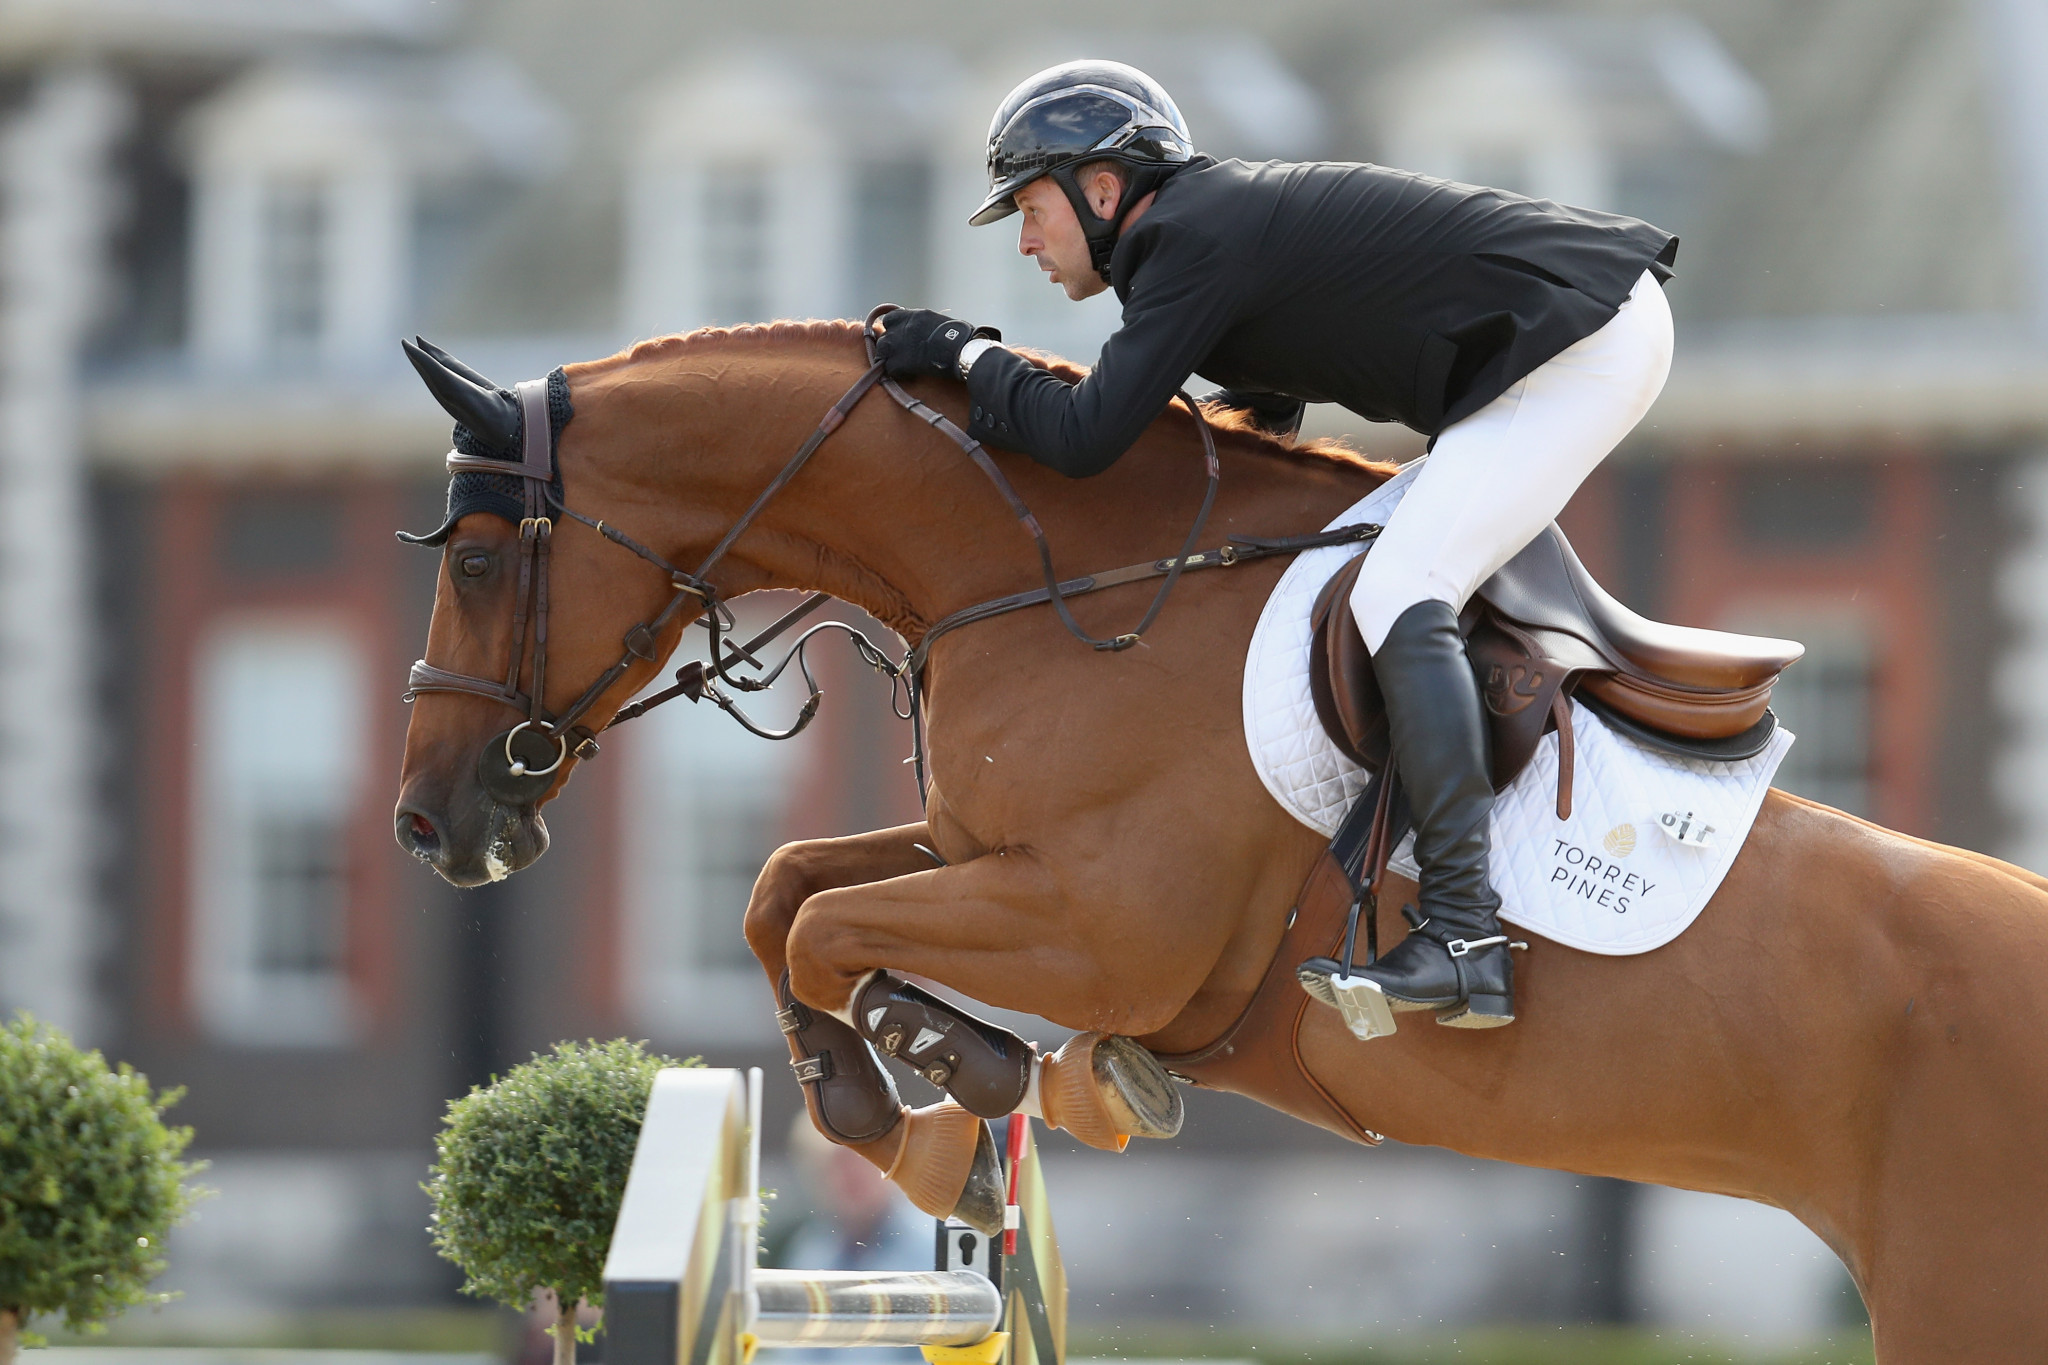 Show jumper Eric Lamaze has claimed a decision to reduce team sizes at the Tokyo 2020 Olympics will be "disastrous" ©Getty Images